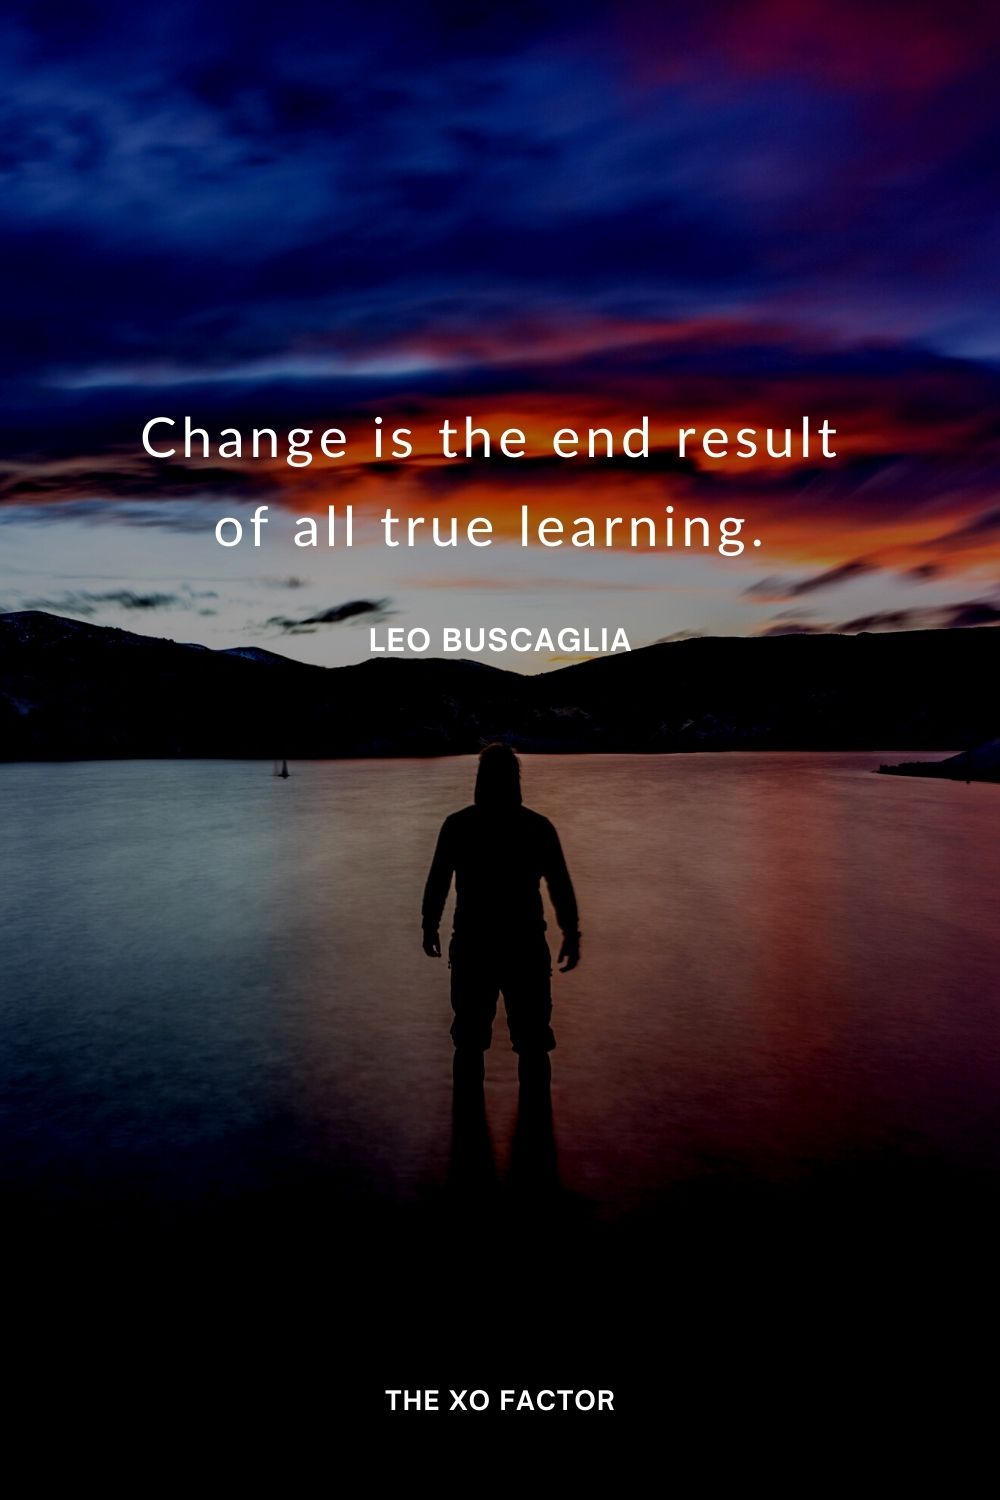 Change is the end result of all true learning.